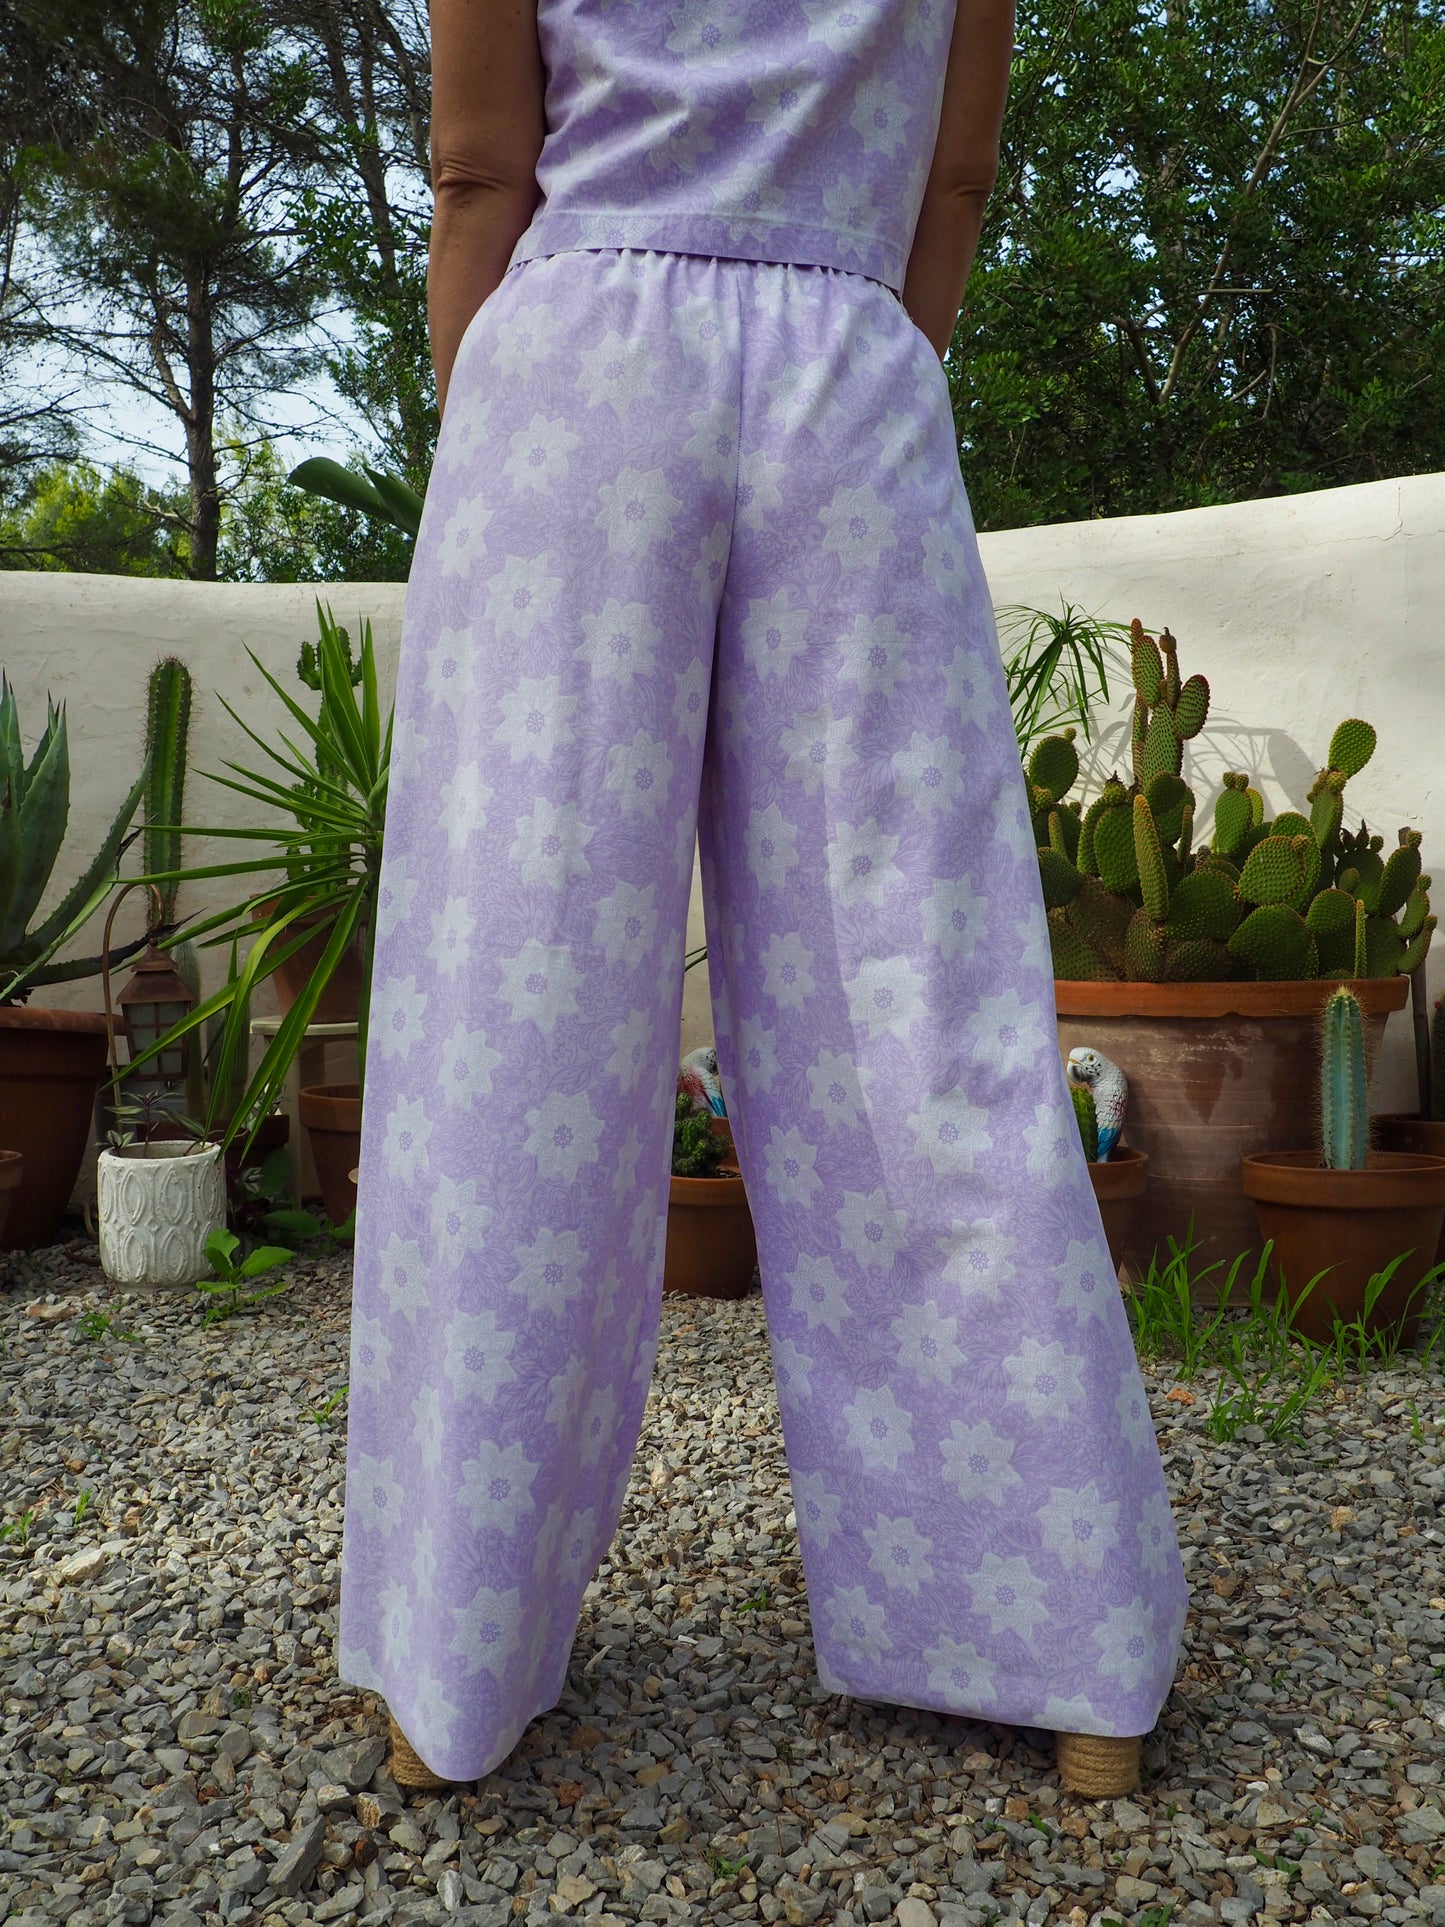 Vintage purple and white floral pattern textiles crop top t-shirt up-cycled by Vagabond Ibiza